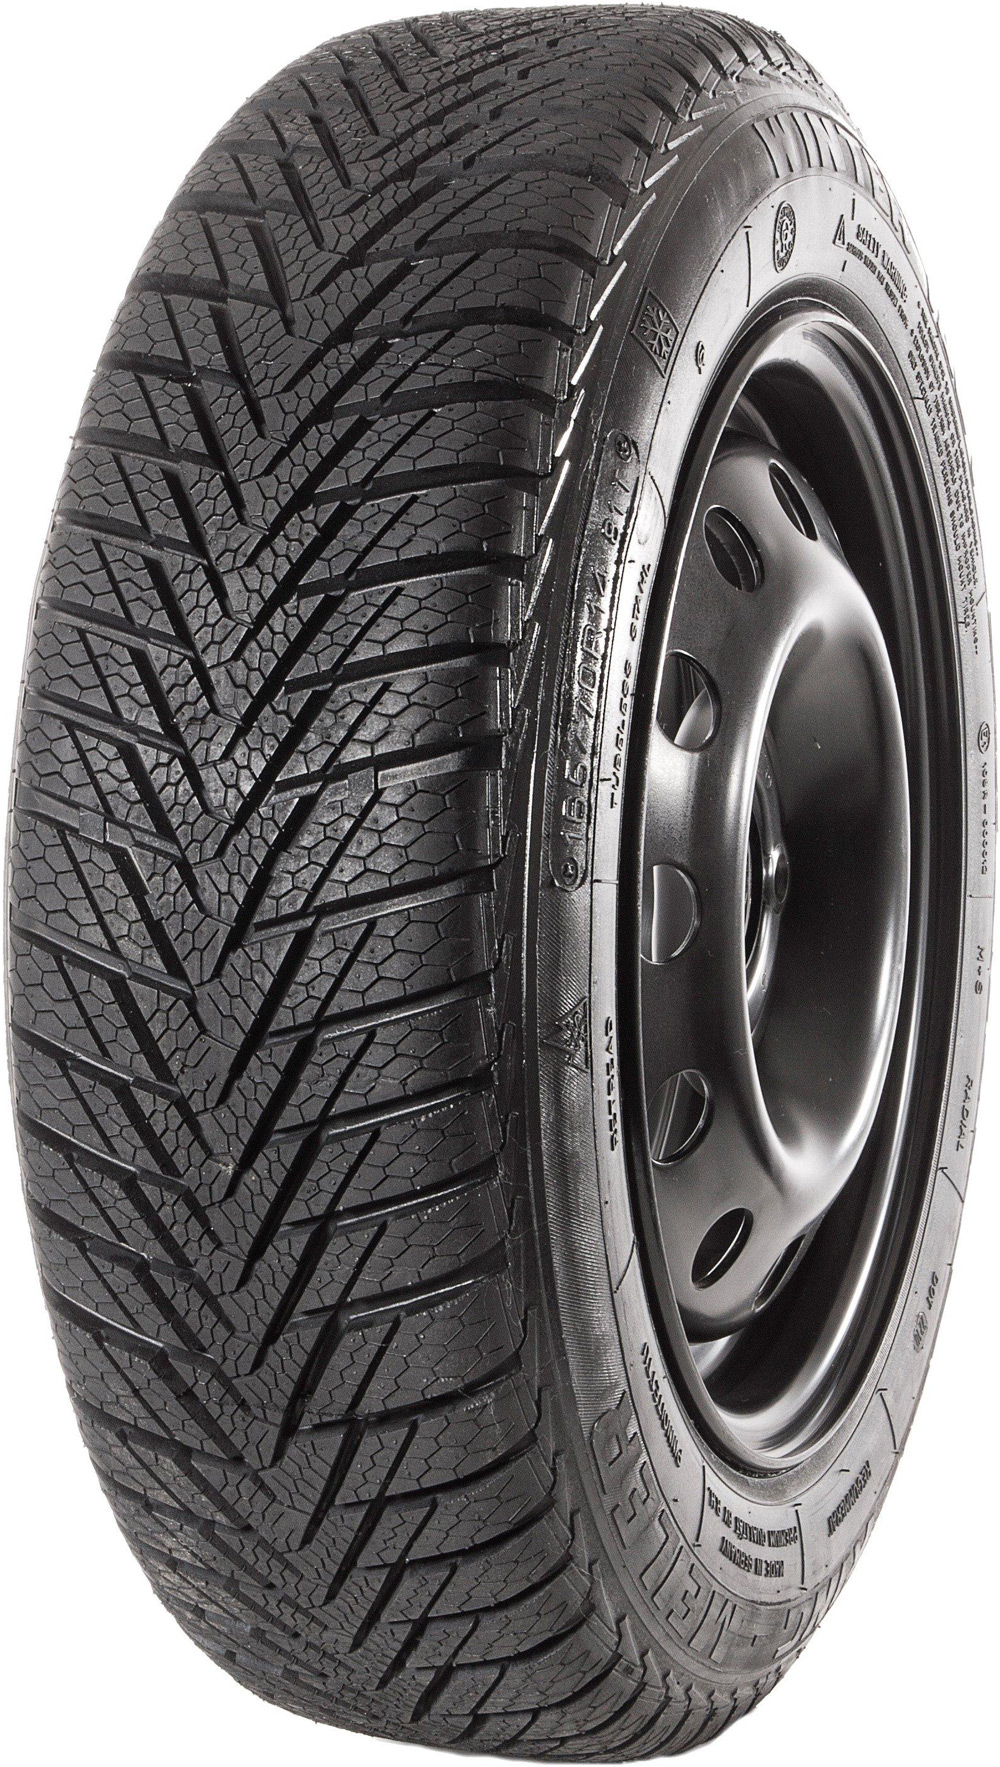 Anvelope auto King Meiler WT 80+ 185/60 R14 82T